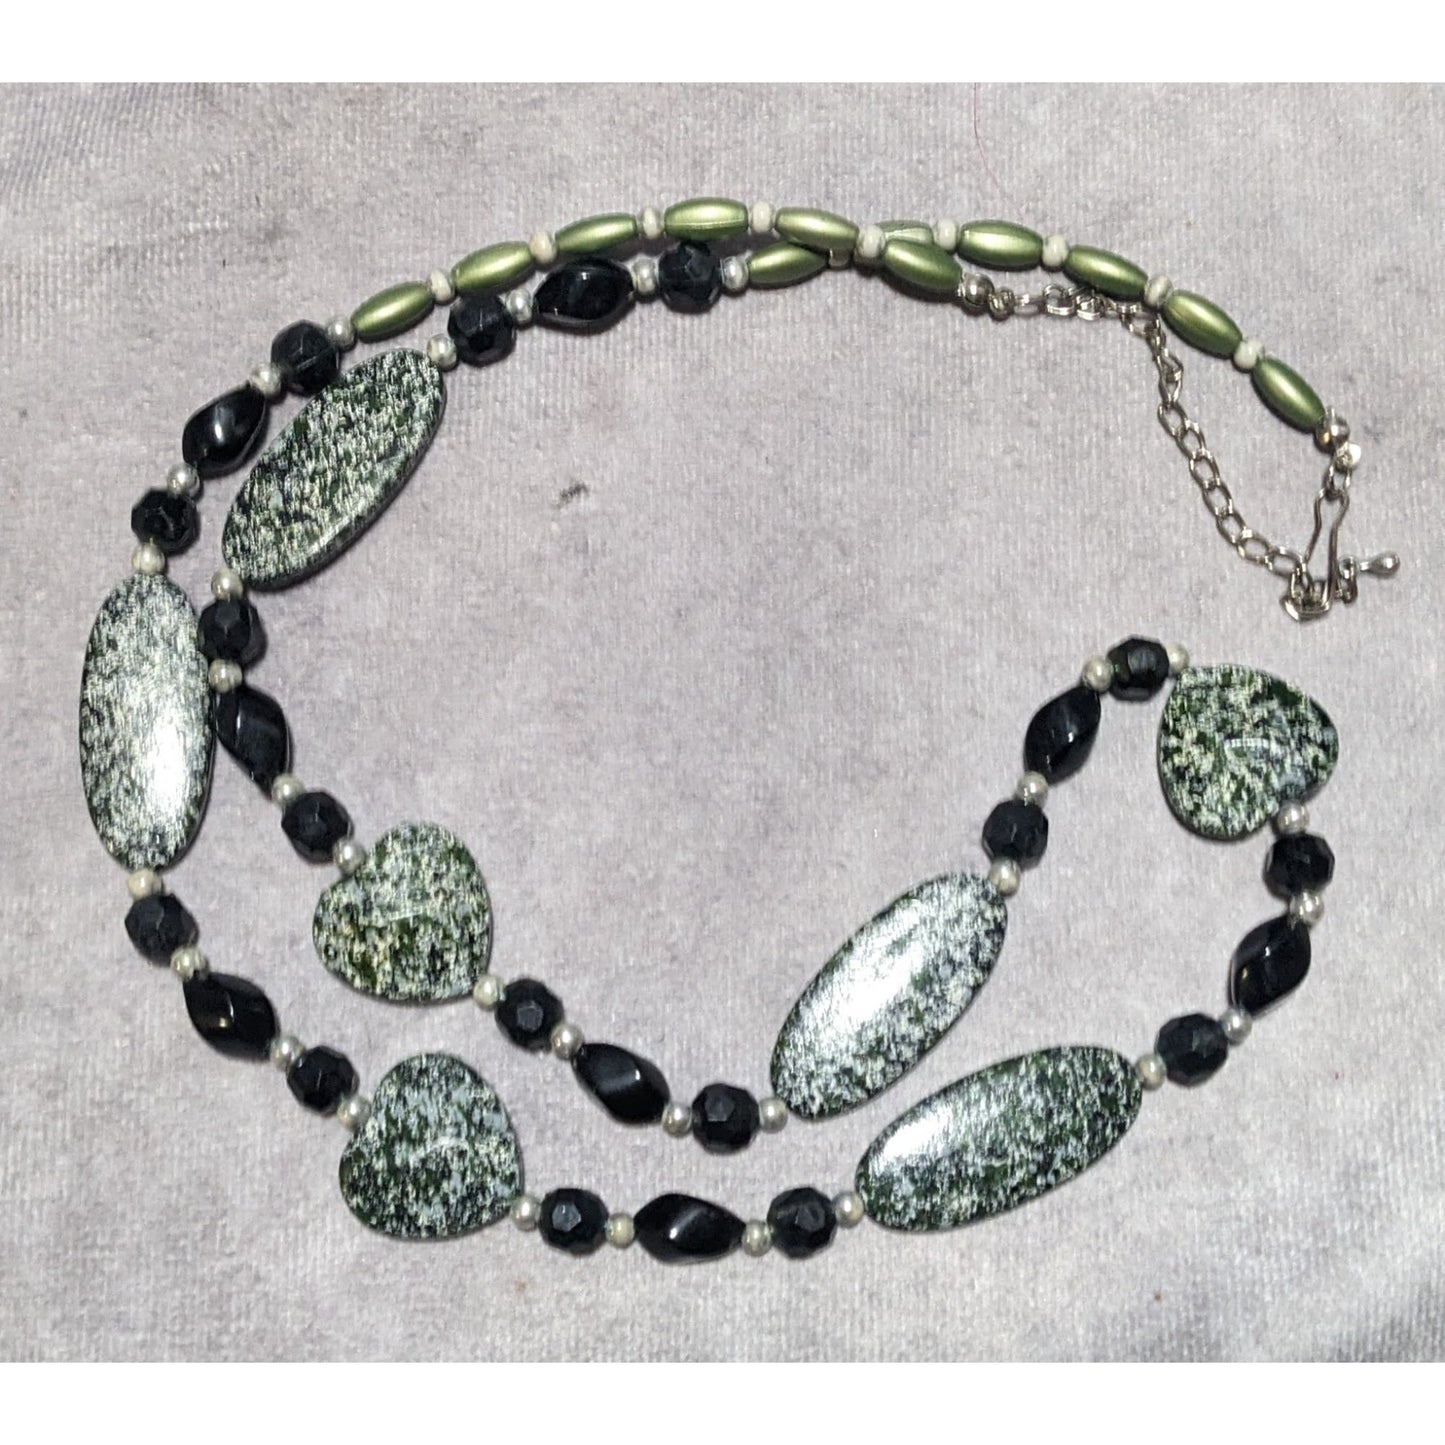 Green & Black Speckled Beaded Necklace